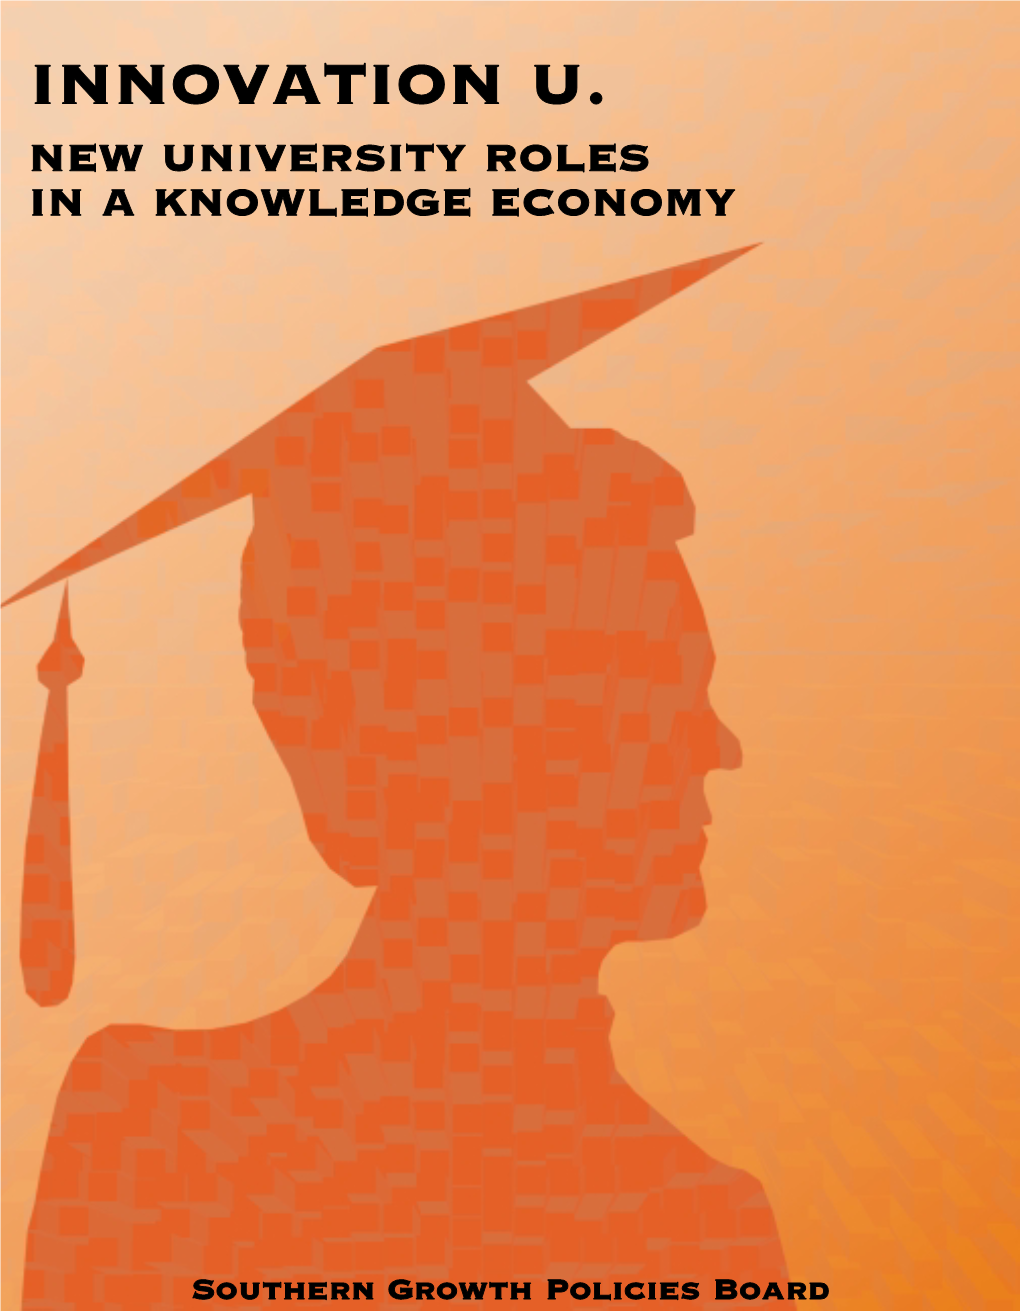 Innovation U.: New University Roles in a Knowledge Economy